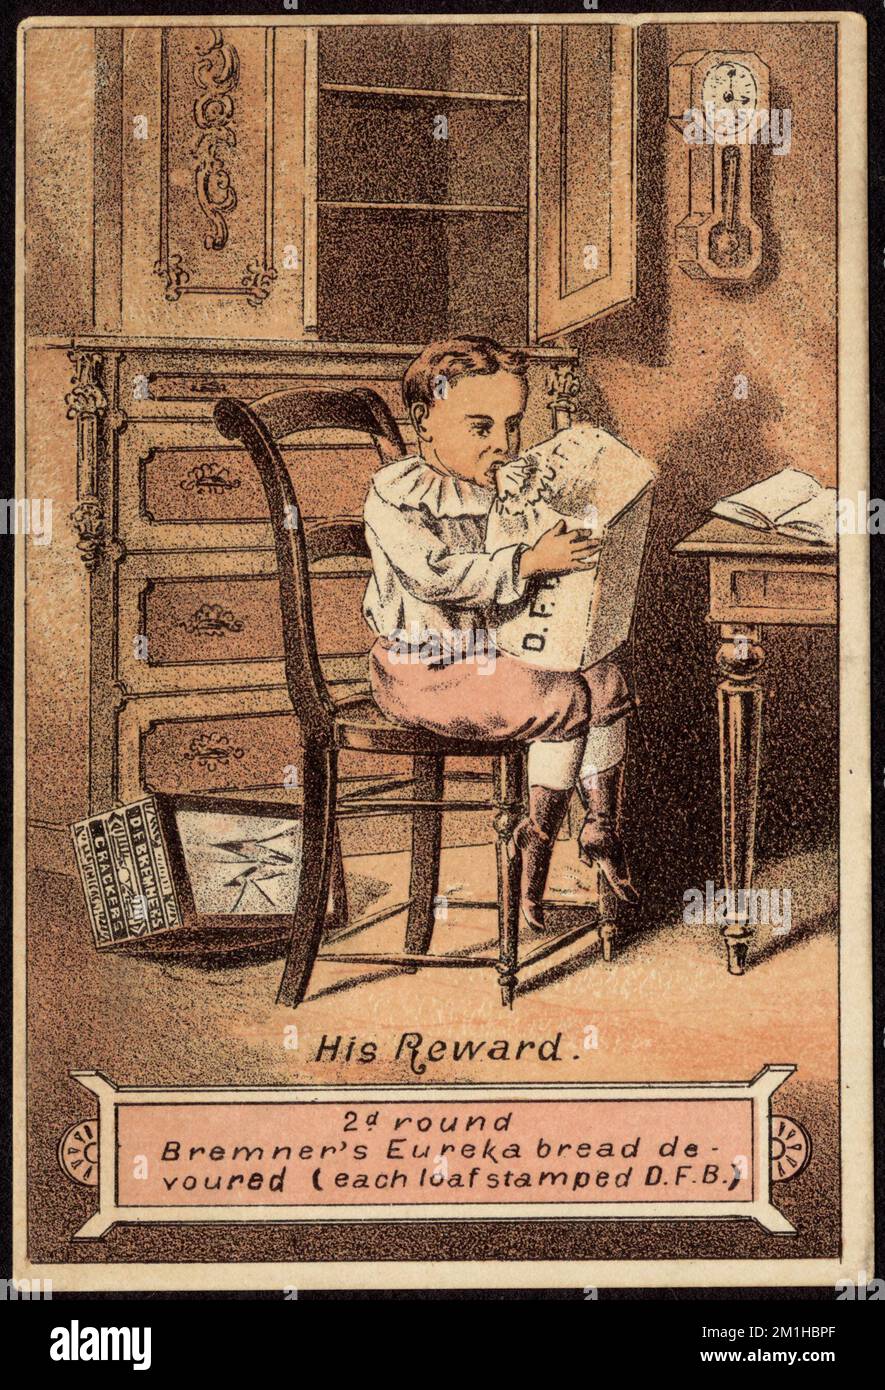 His reward. 2d. round Bremner's Eureka bread devoured (each loaf stamped D. F. B.) , Boys, Bread, 19th Century American Trade Cards Stock Photo